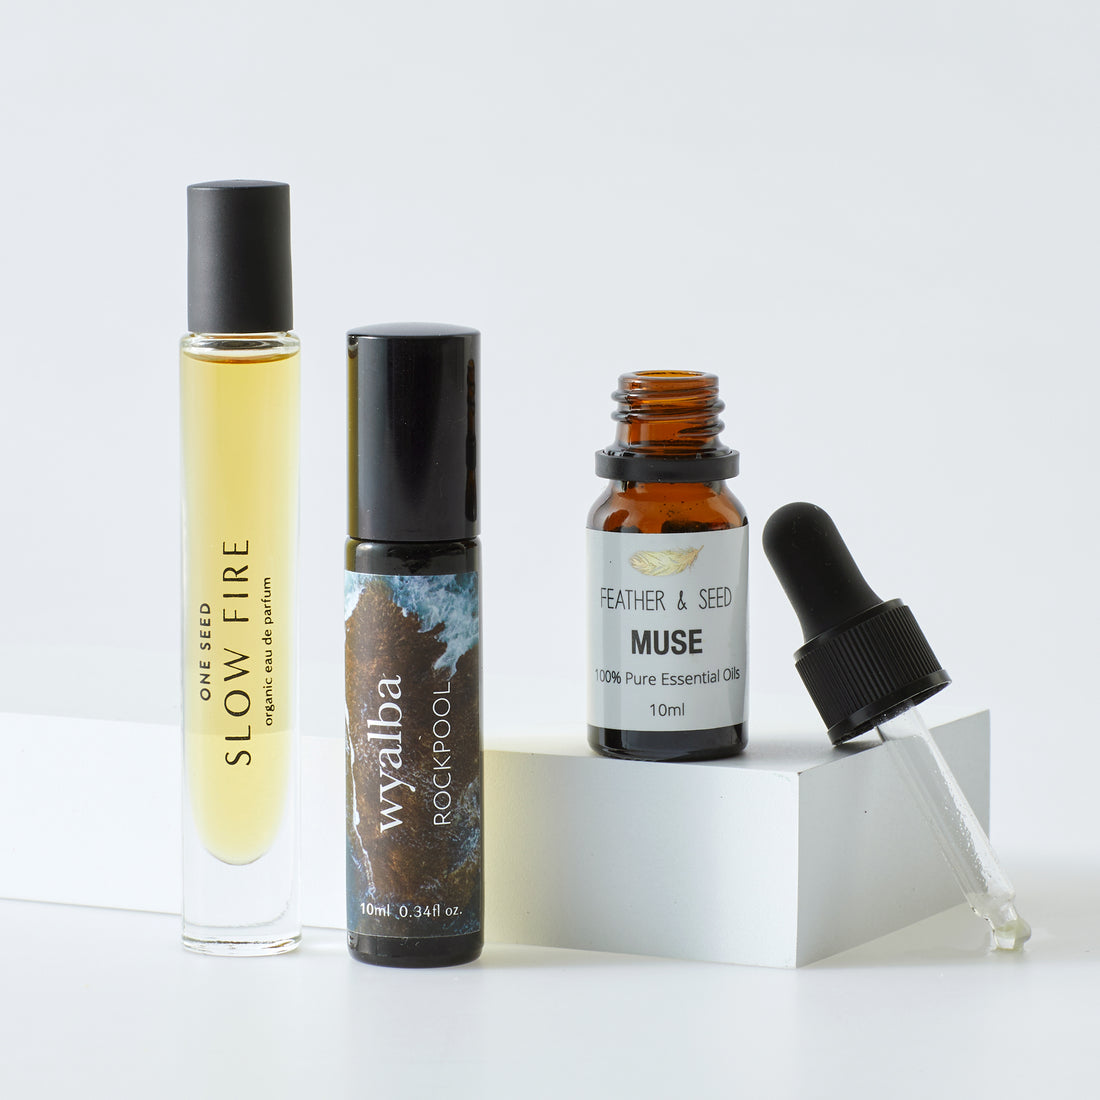 For Men 2 Gift Set is curated with three products chosen  for their masculine appeal.  PRODUCTS INCLUDED:  ・Feather & Seed Muse Essential Oil, 10ml ・Wyalba Rockpool Natural Perfume Spray, 10ml ・One Seed Slow Fire Natural Perfume Roll On, 9ml